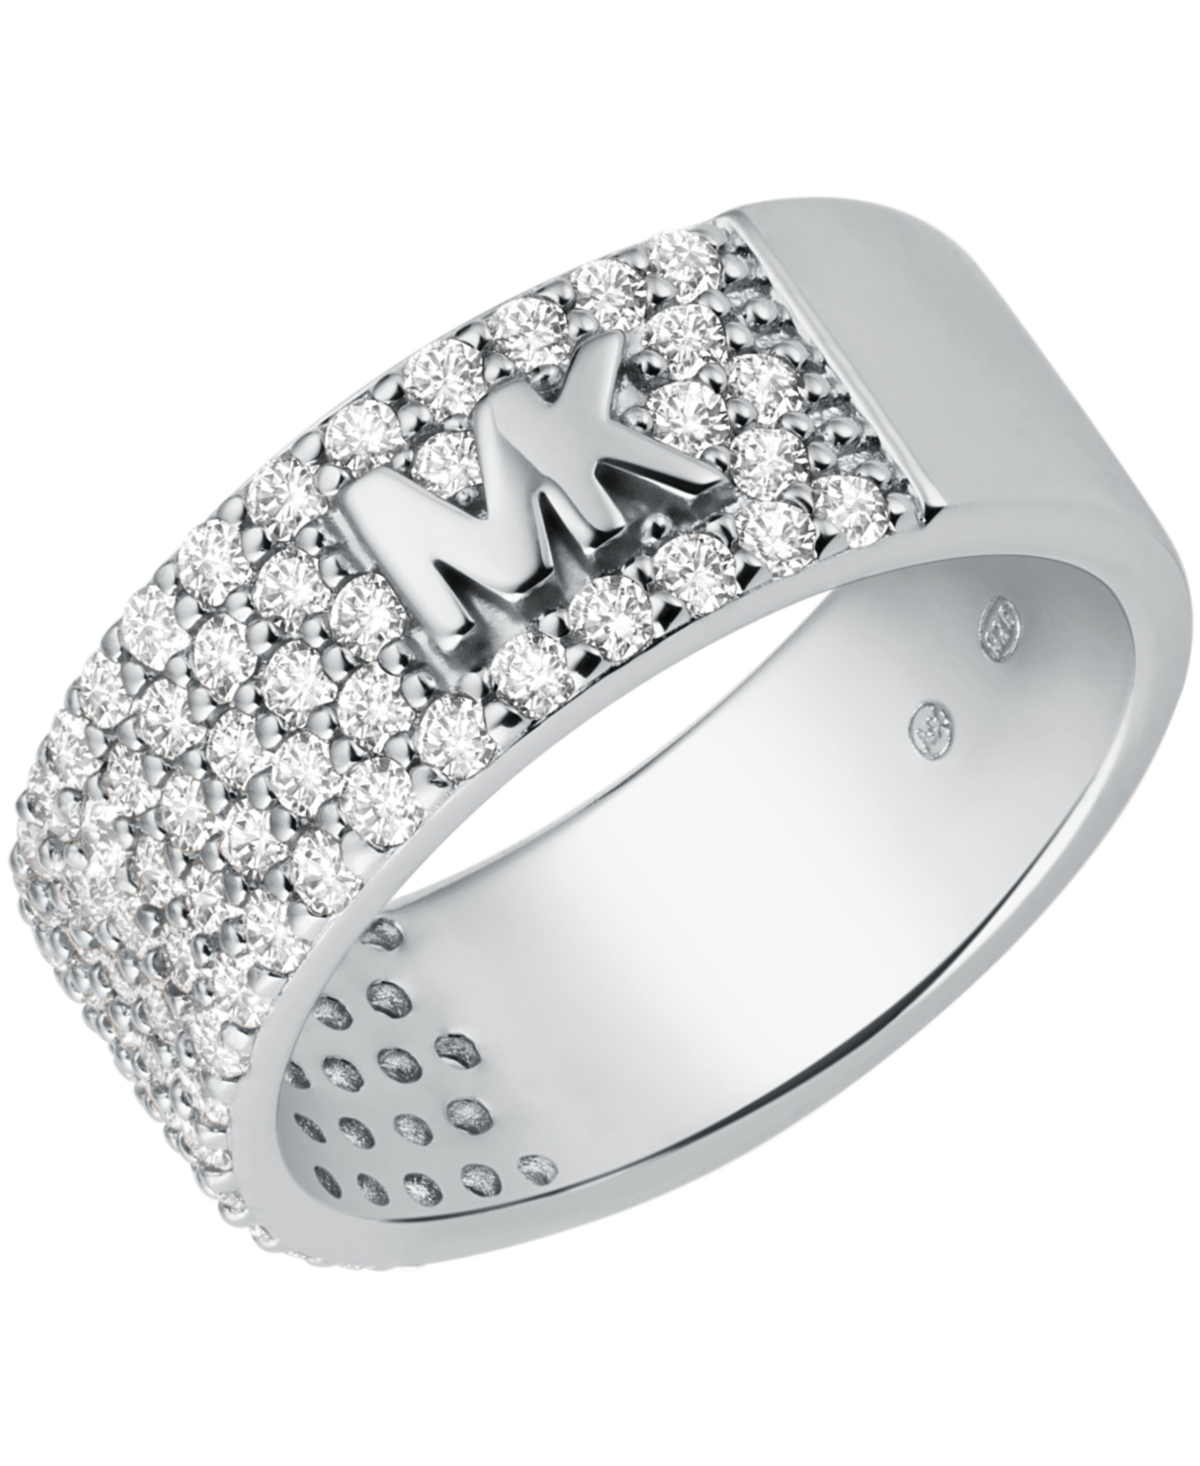 Michael Kors Women's Pave Band Ring With Clear Stones In Silver Tone